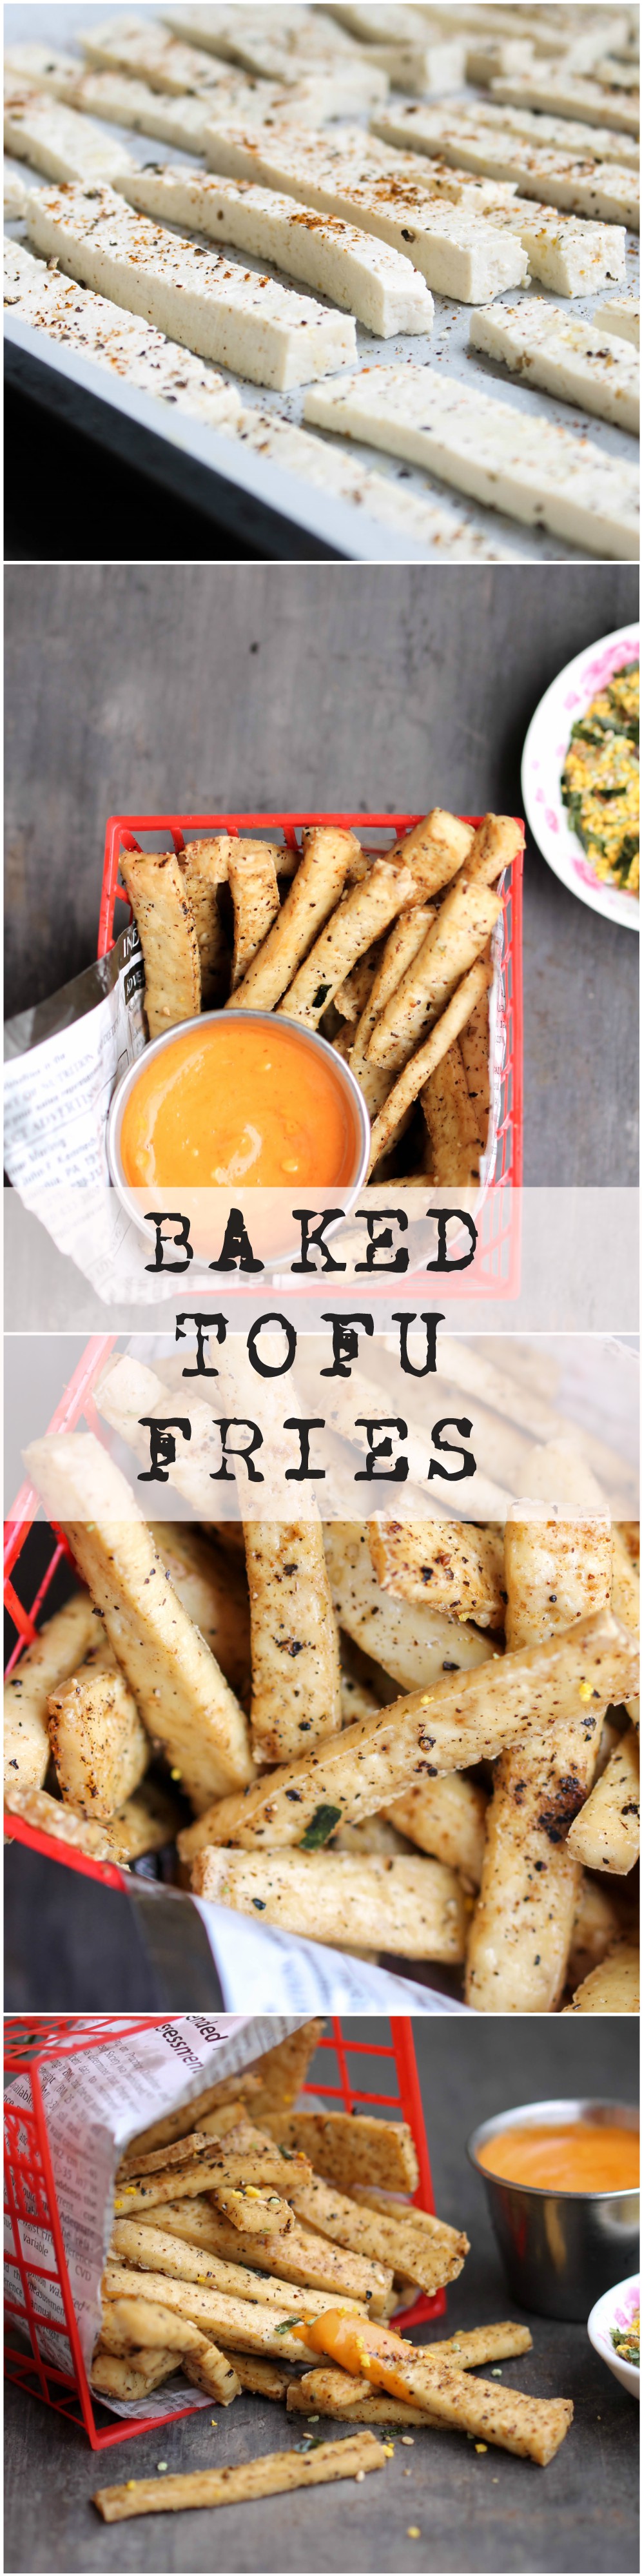 Baked Tofu Fries are naturally gluten-free, vegan, and packed with protein and many other nutrients. It's a quick, rather addictive side that you and your family can enjoy!